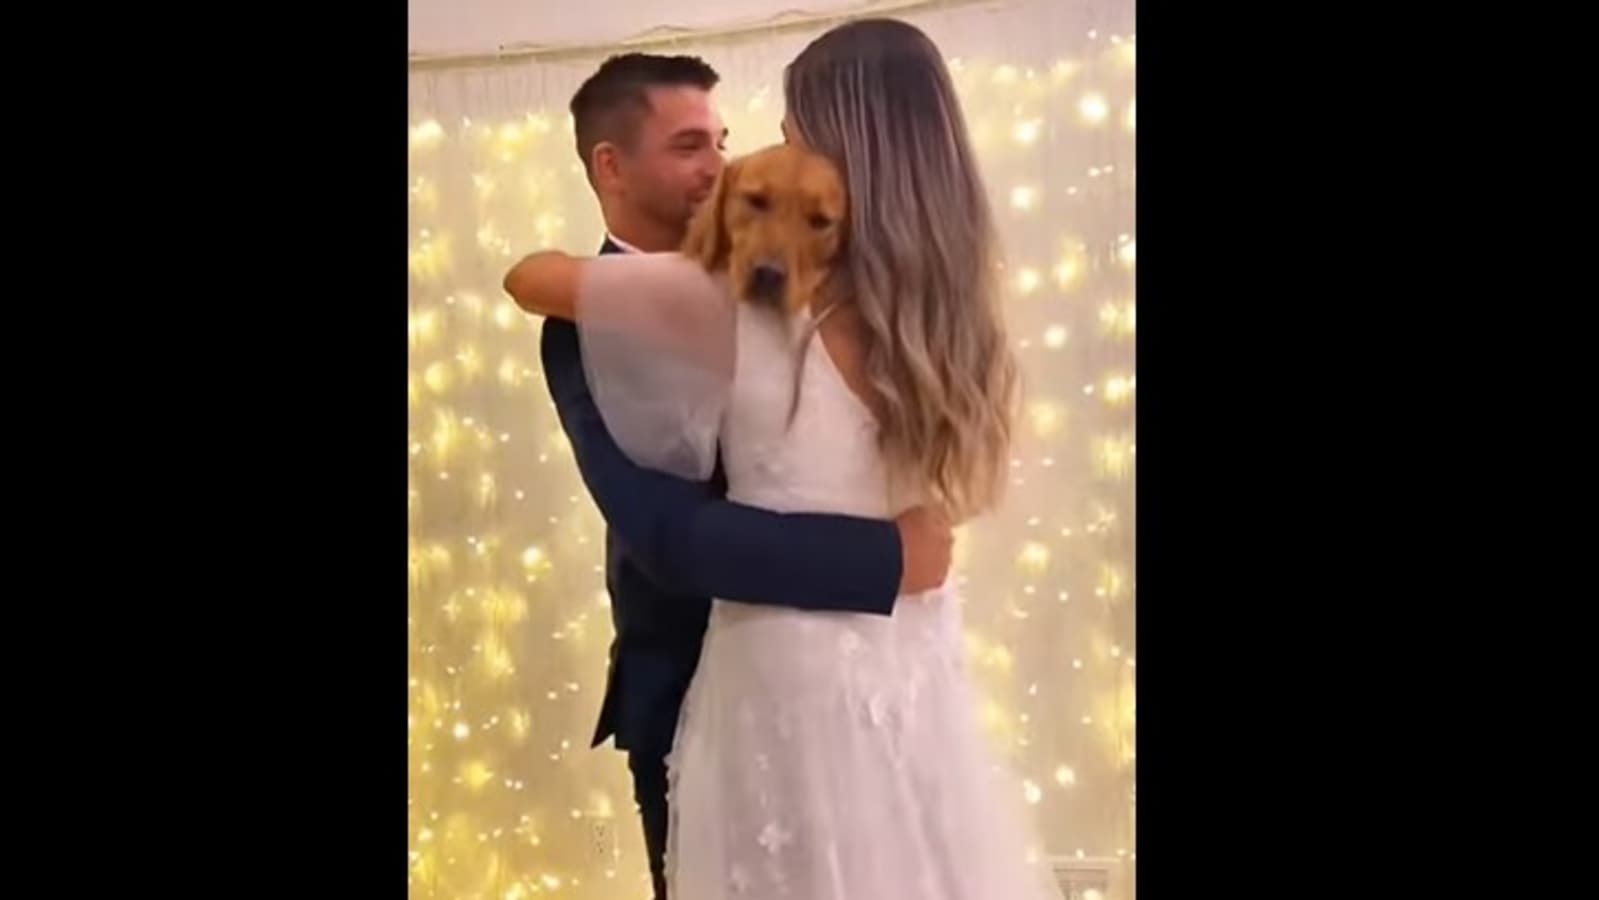 Bride and groom dances with their dog at wedding ceremony. Watch viral video | Trending